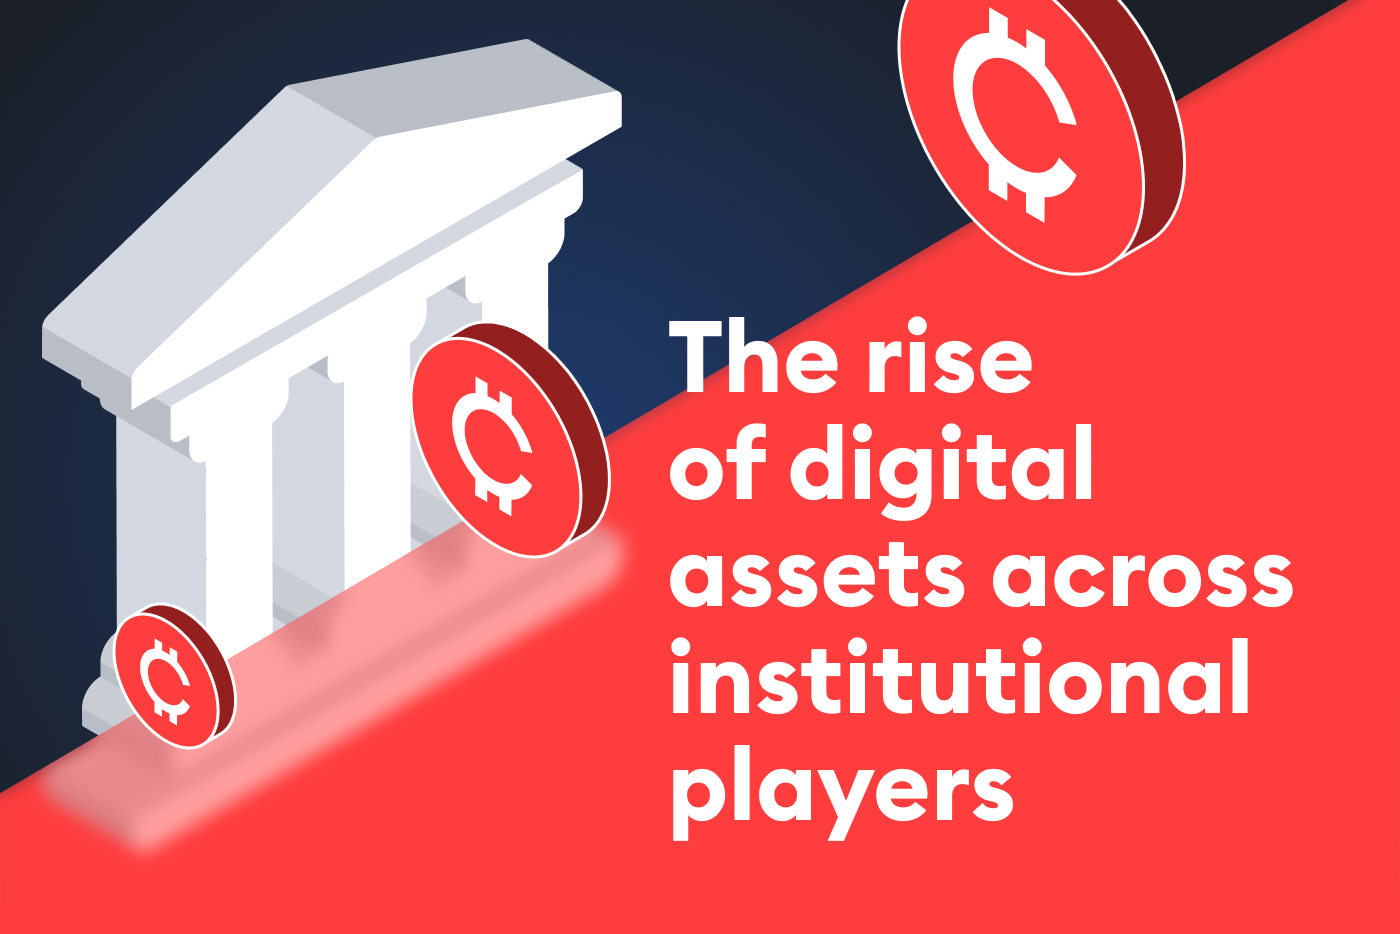 The rise of digital assets across institutional players